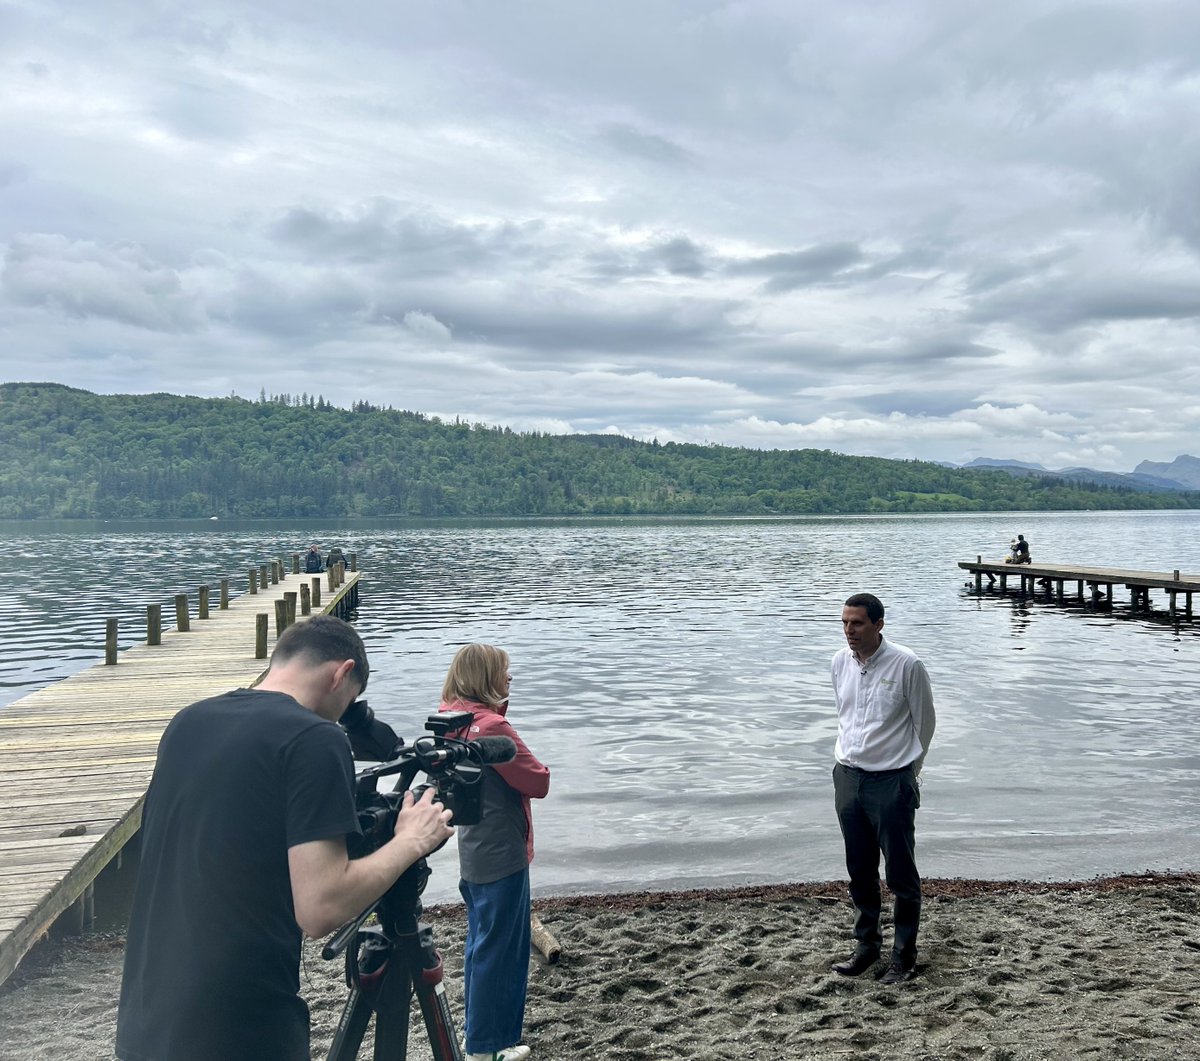 Tune in to @BBCNWT today during the evening news to hear Andy Brown, Environment, Planning, and Engagement Manager at the Environment Agency, as well as chair of the @LoveWindermere partnership, discuss all things Lake Windermere 🌊